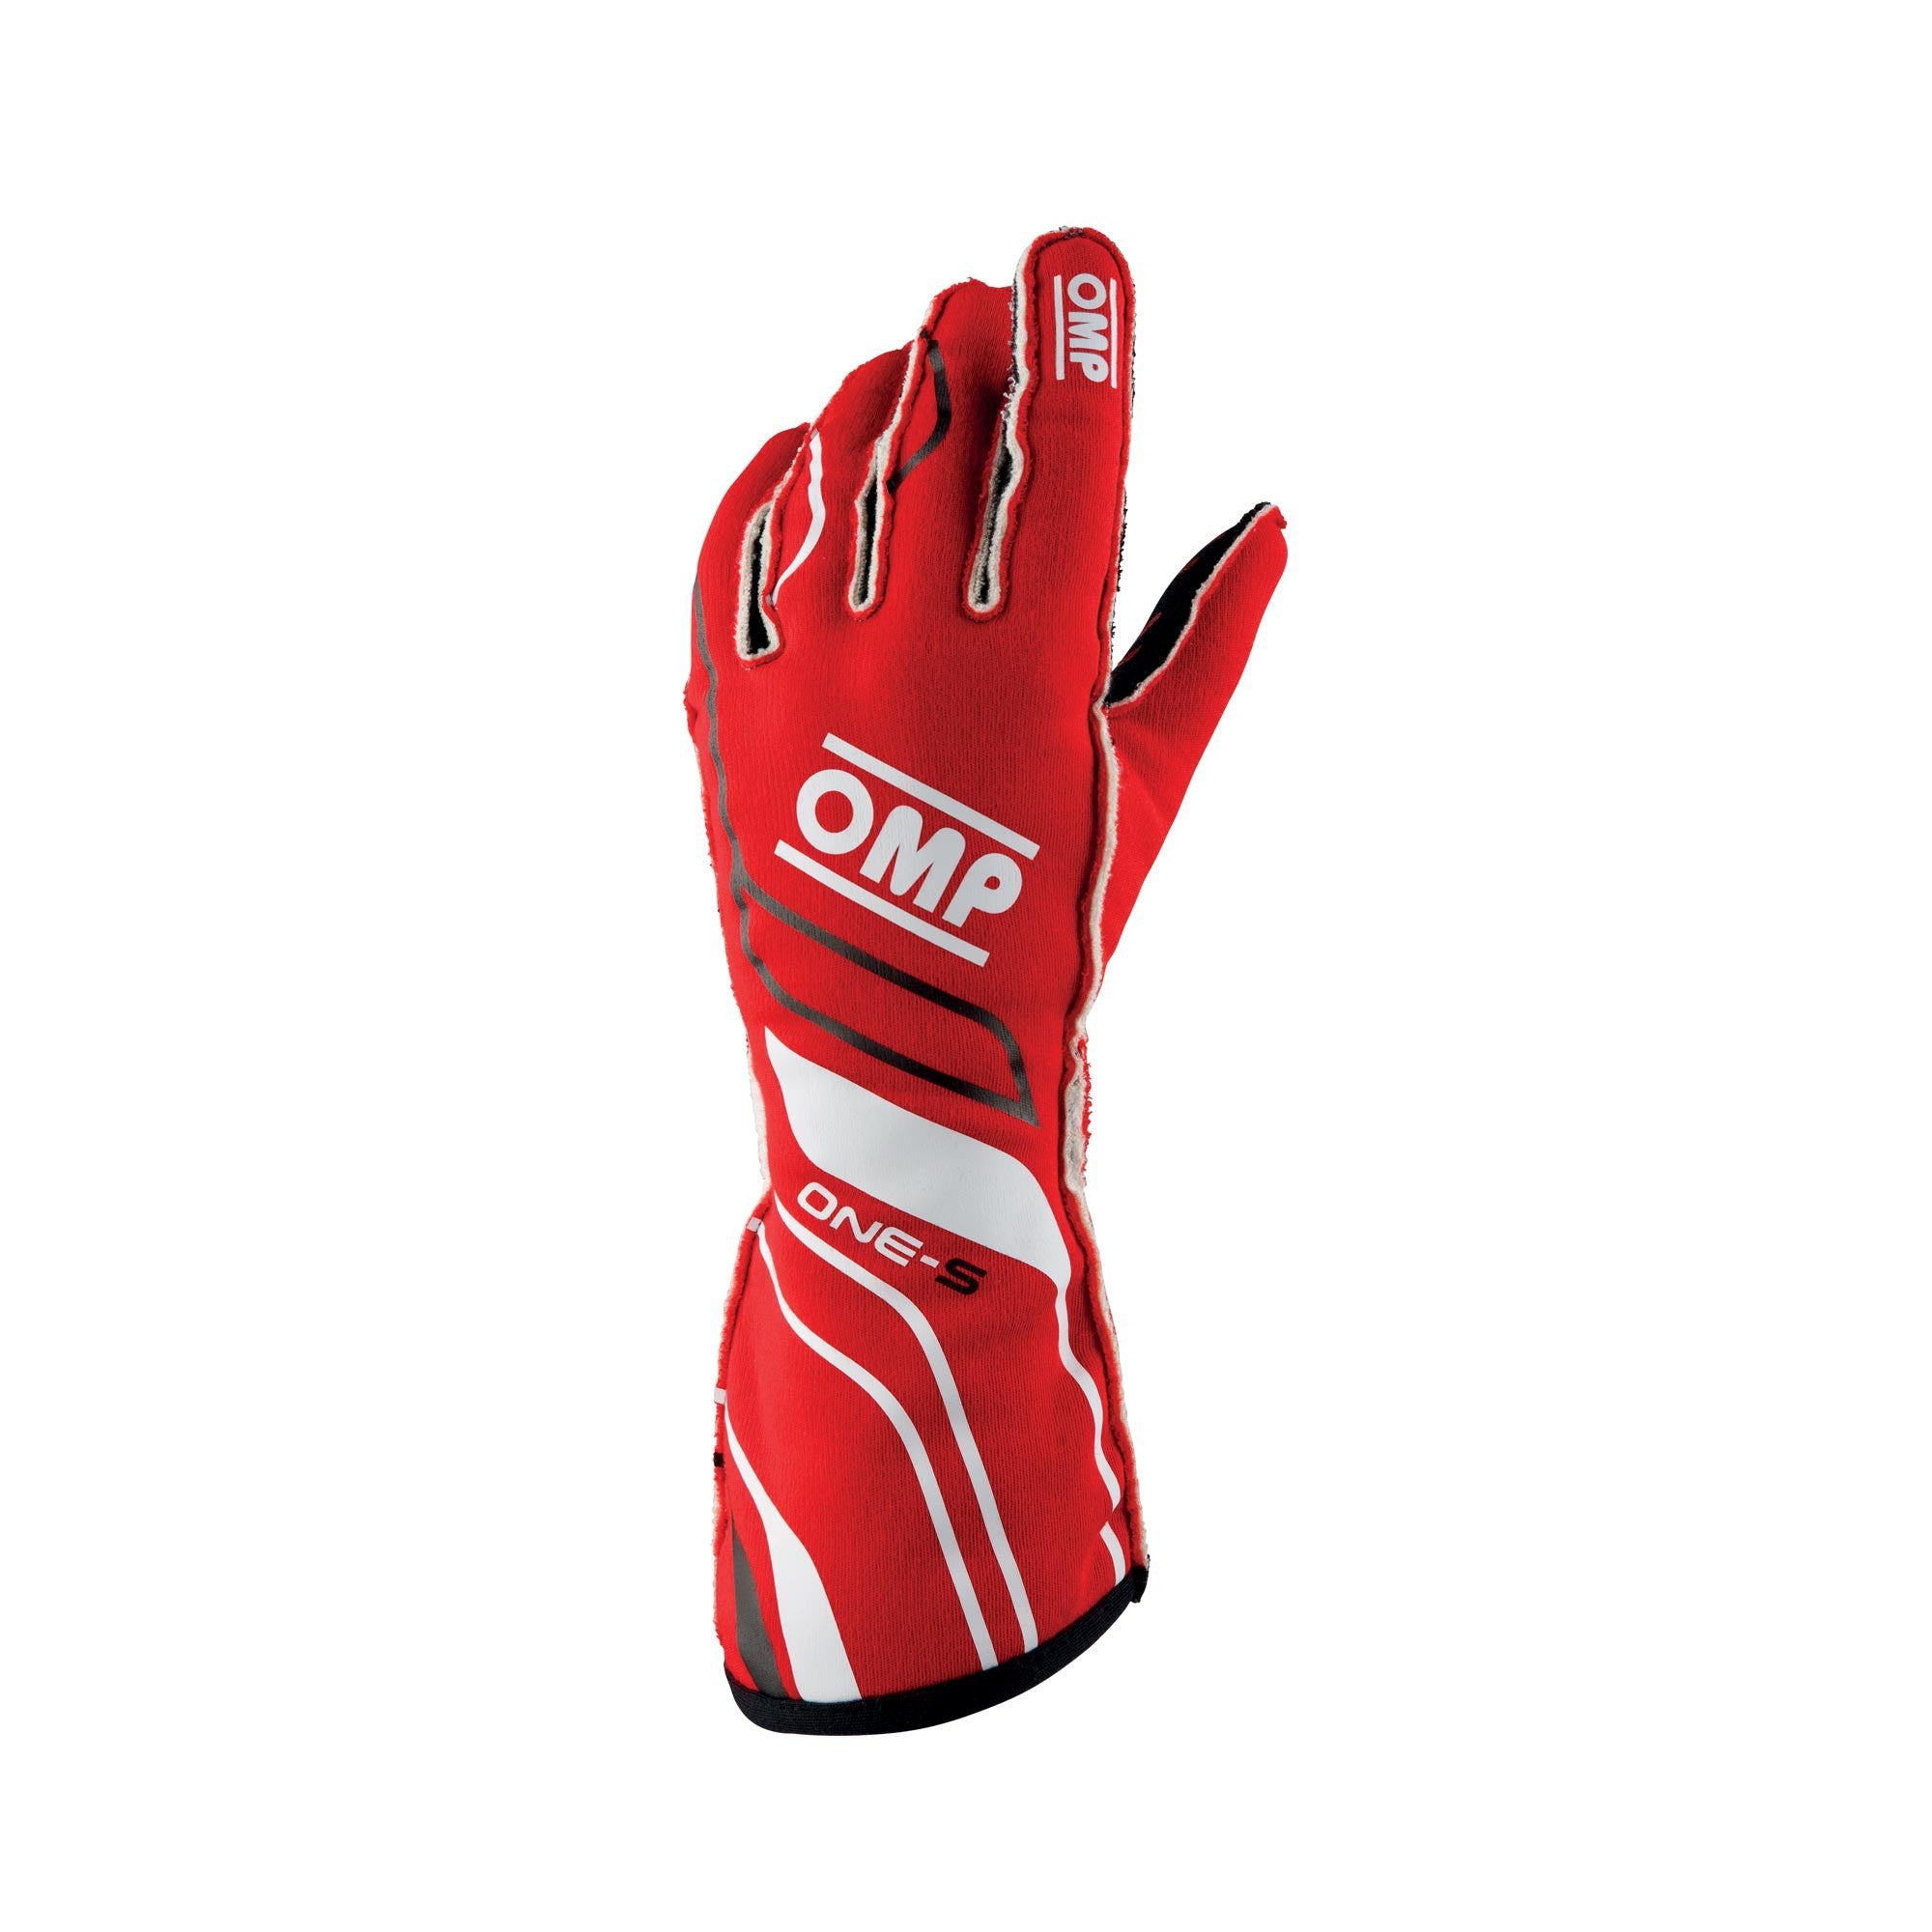 OMP NOMEX RACING GLOVE ONE-S - Racing Safety Equipment Supplier Ontario, Paragon Competition